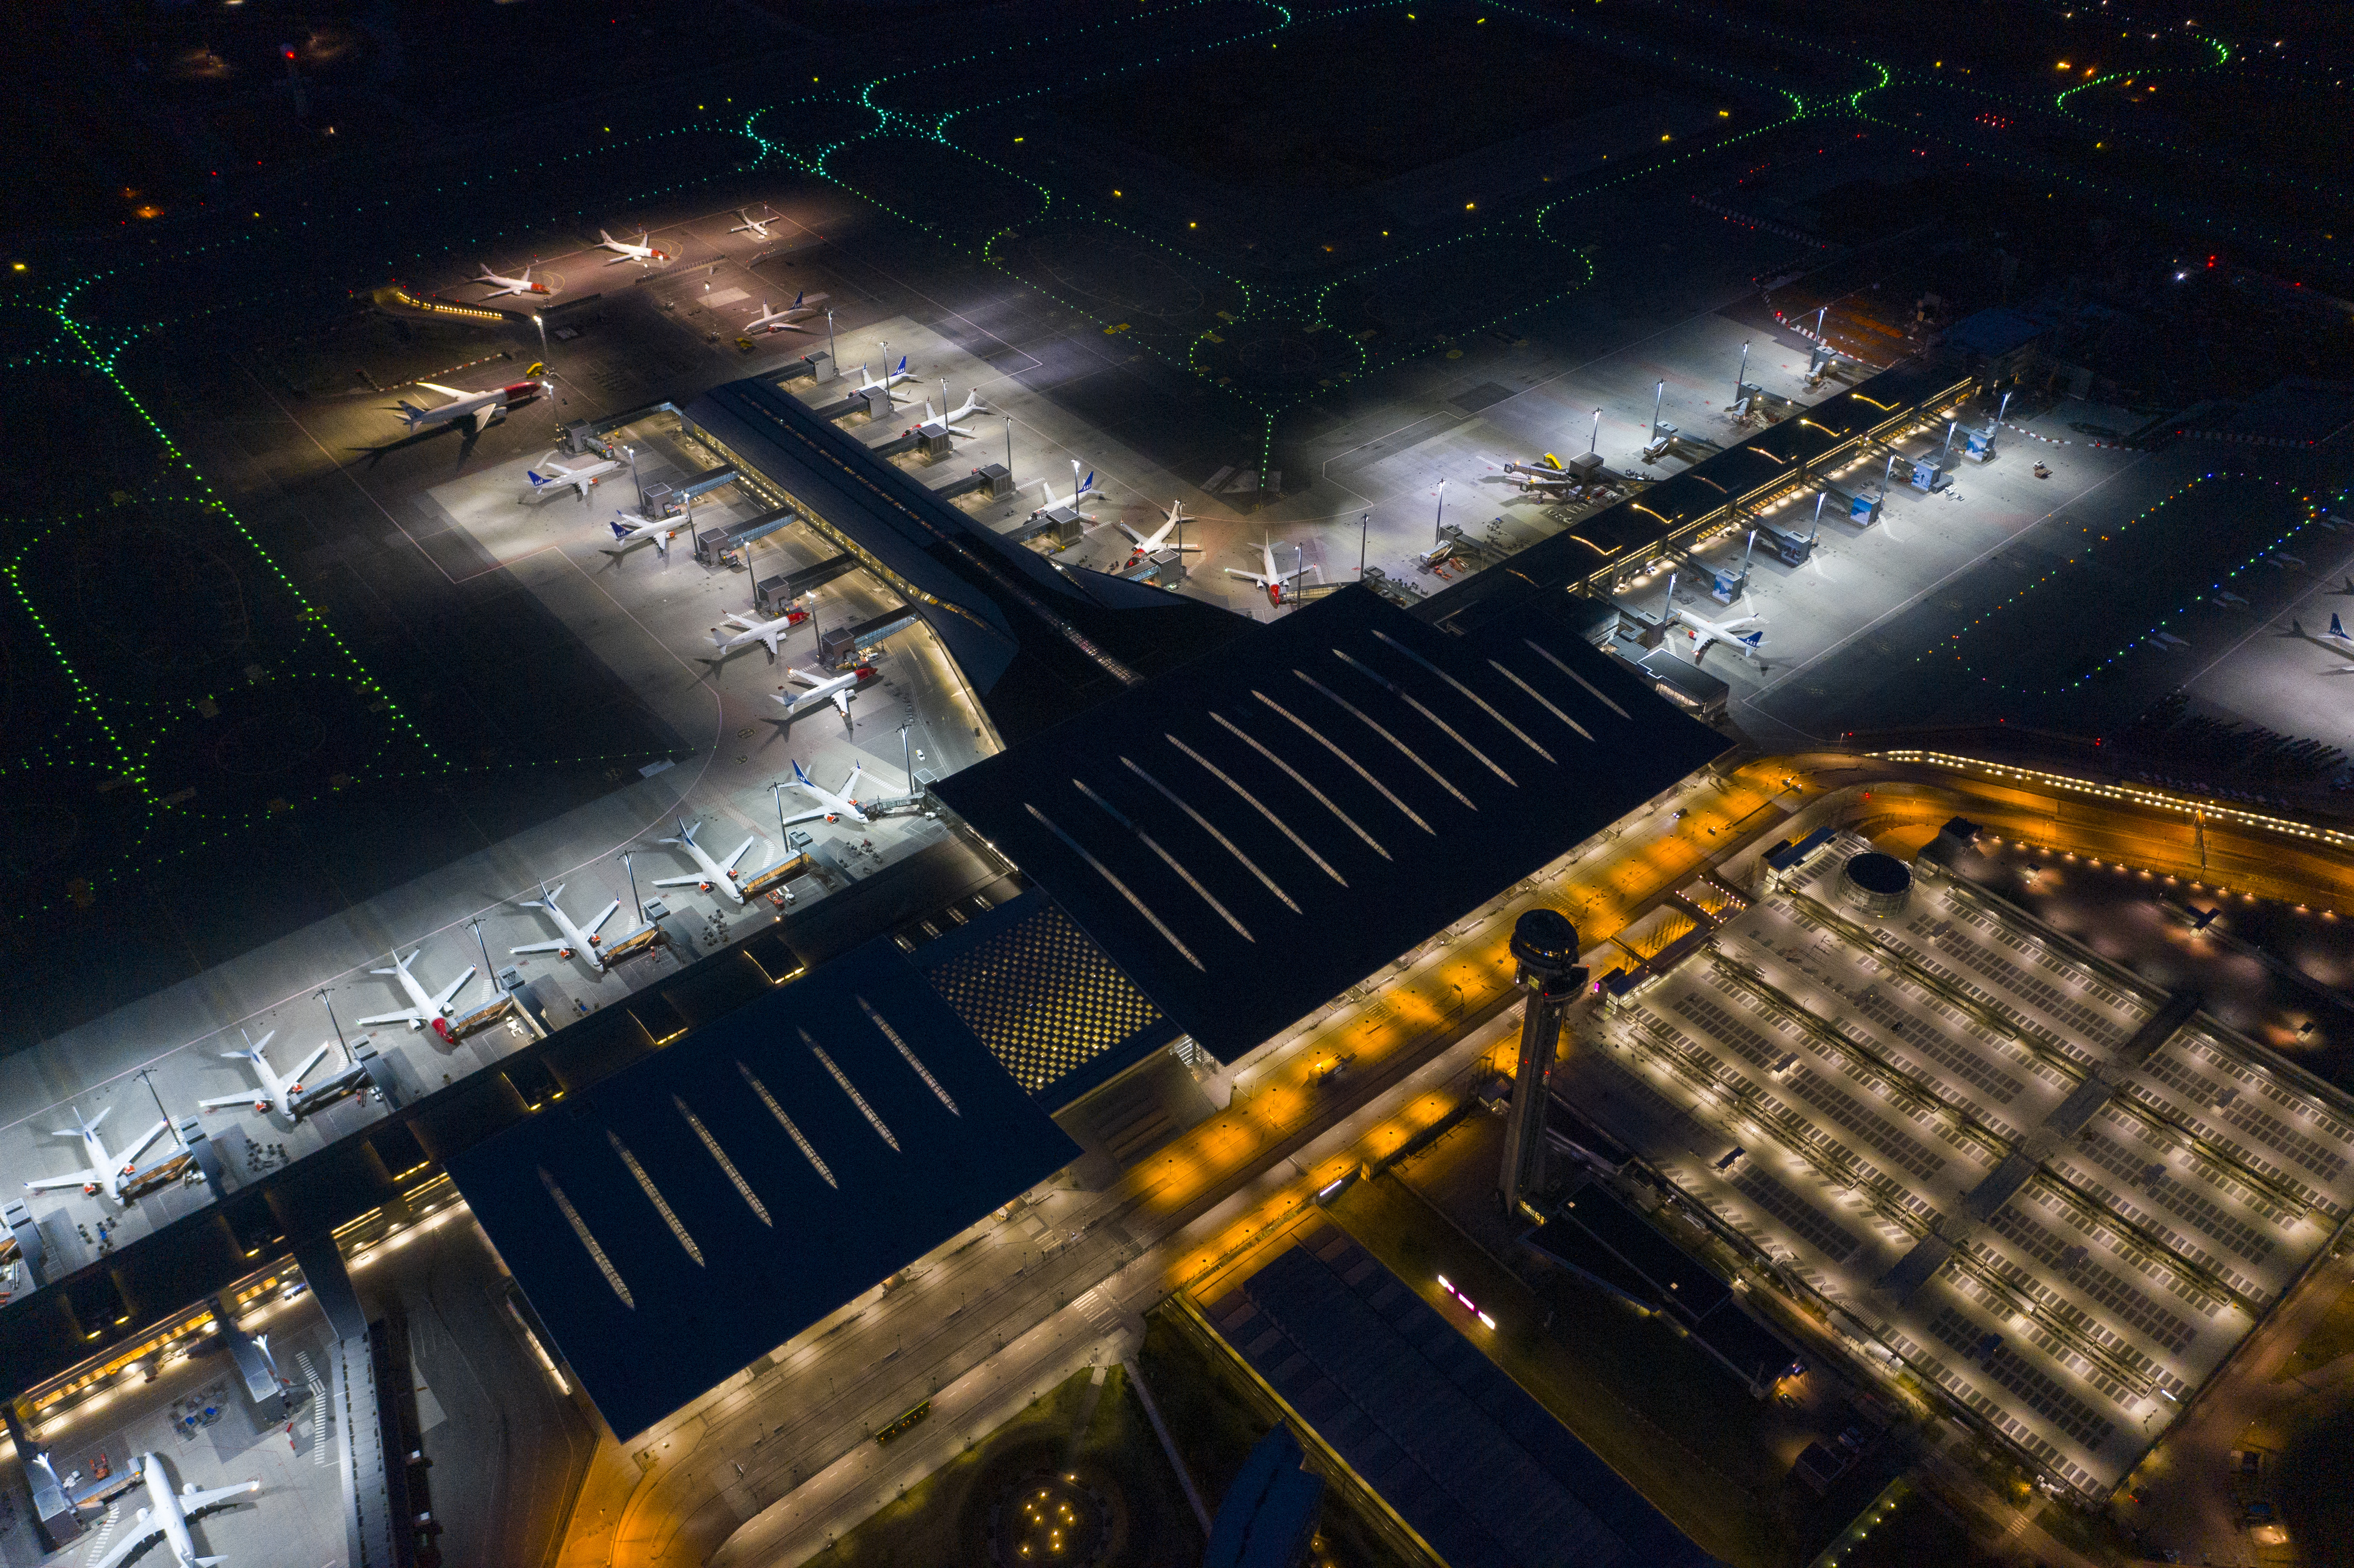 Terminal at Oslo airport by night